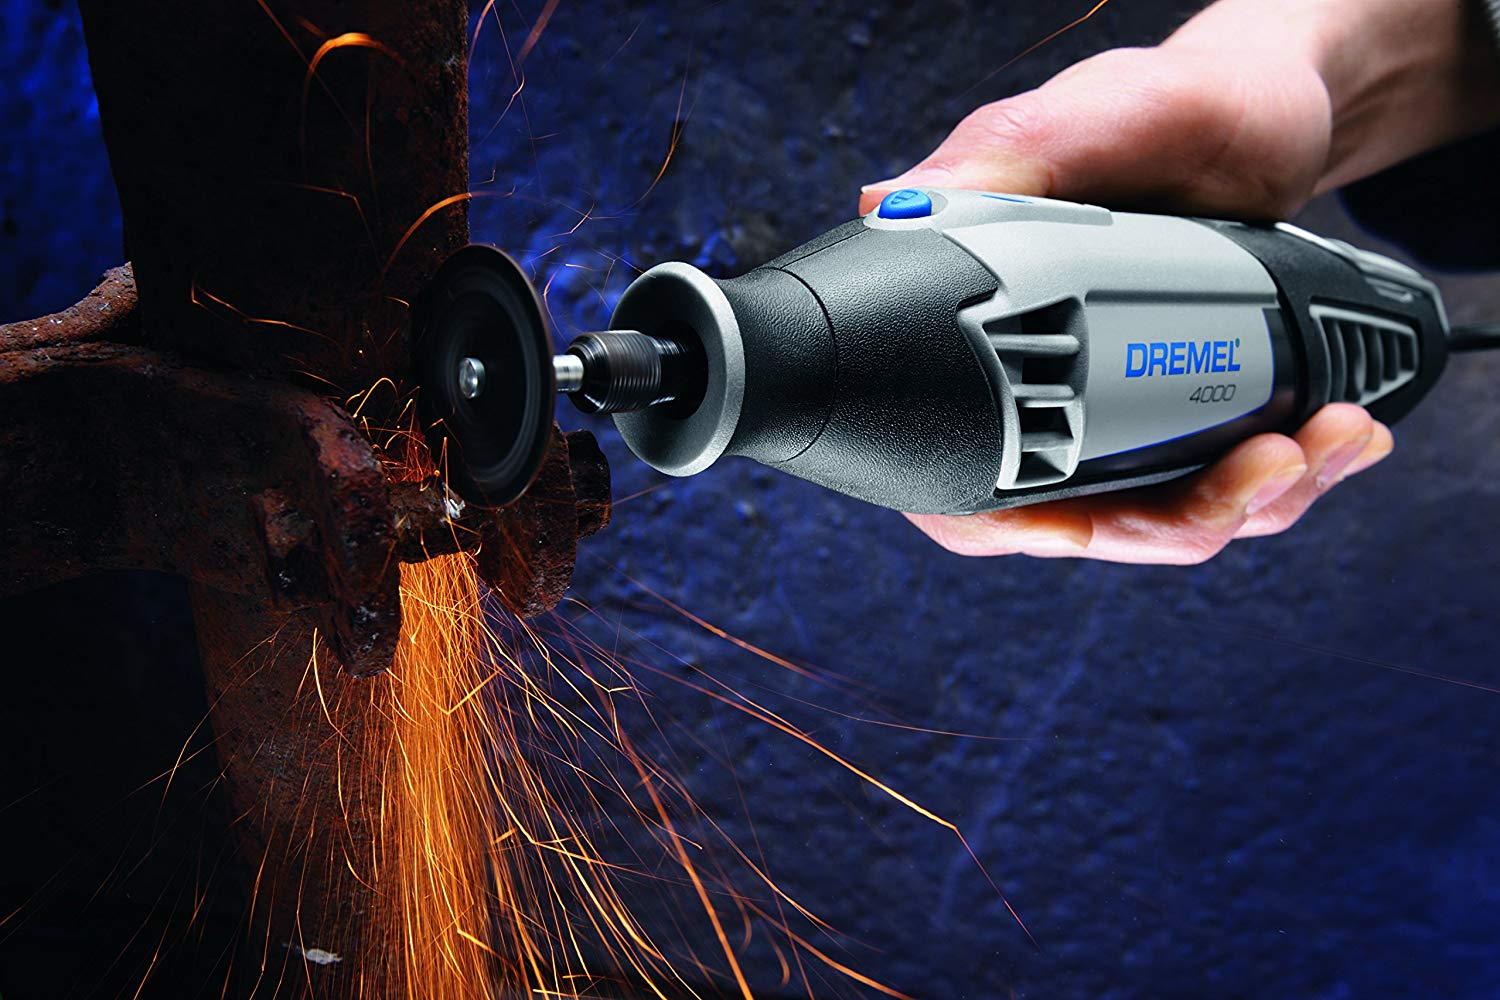 Dremel 4000-6/50-FF High Performance Rotary Tool Kit with Flex Shaft- 6 Attachments & 50 Accessories- Grinder, Sander, Polisher, Engraver- Perfect